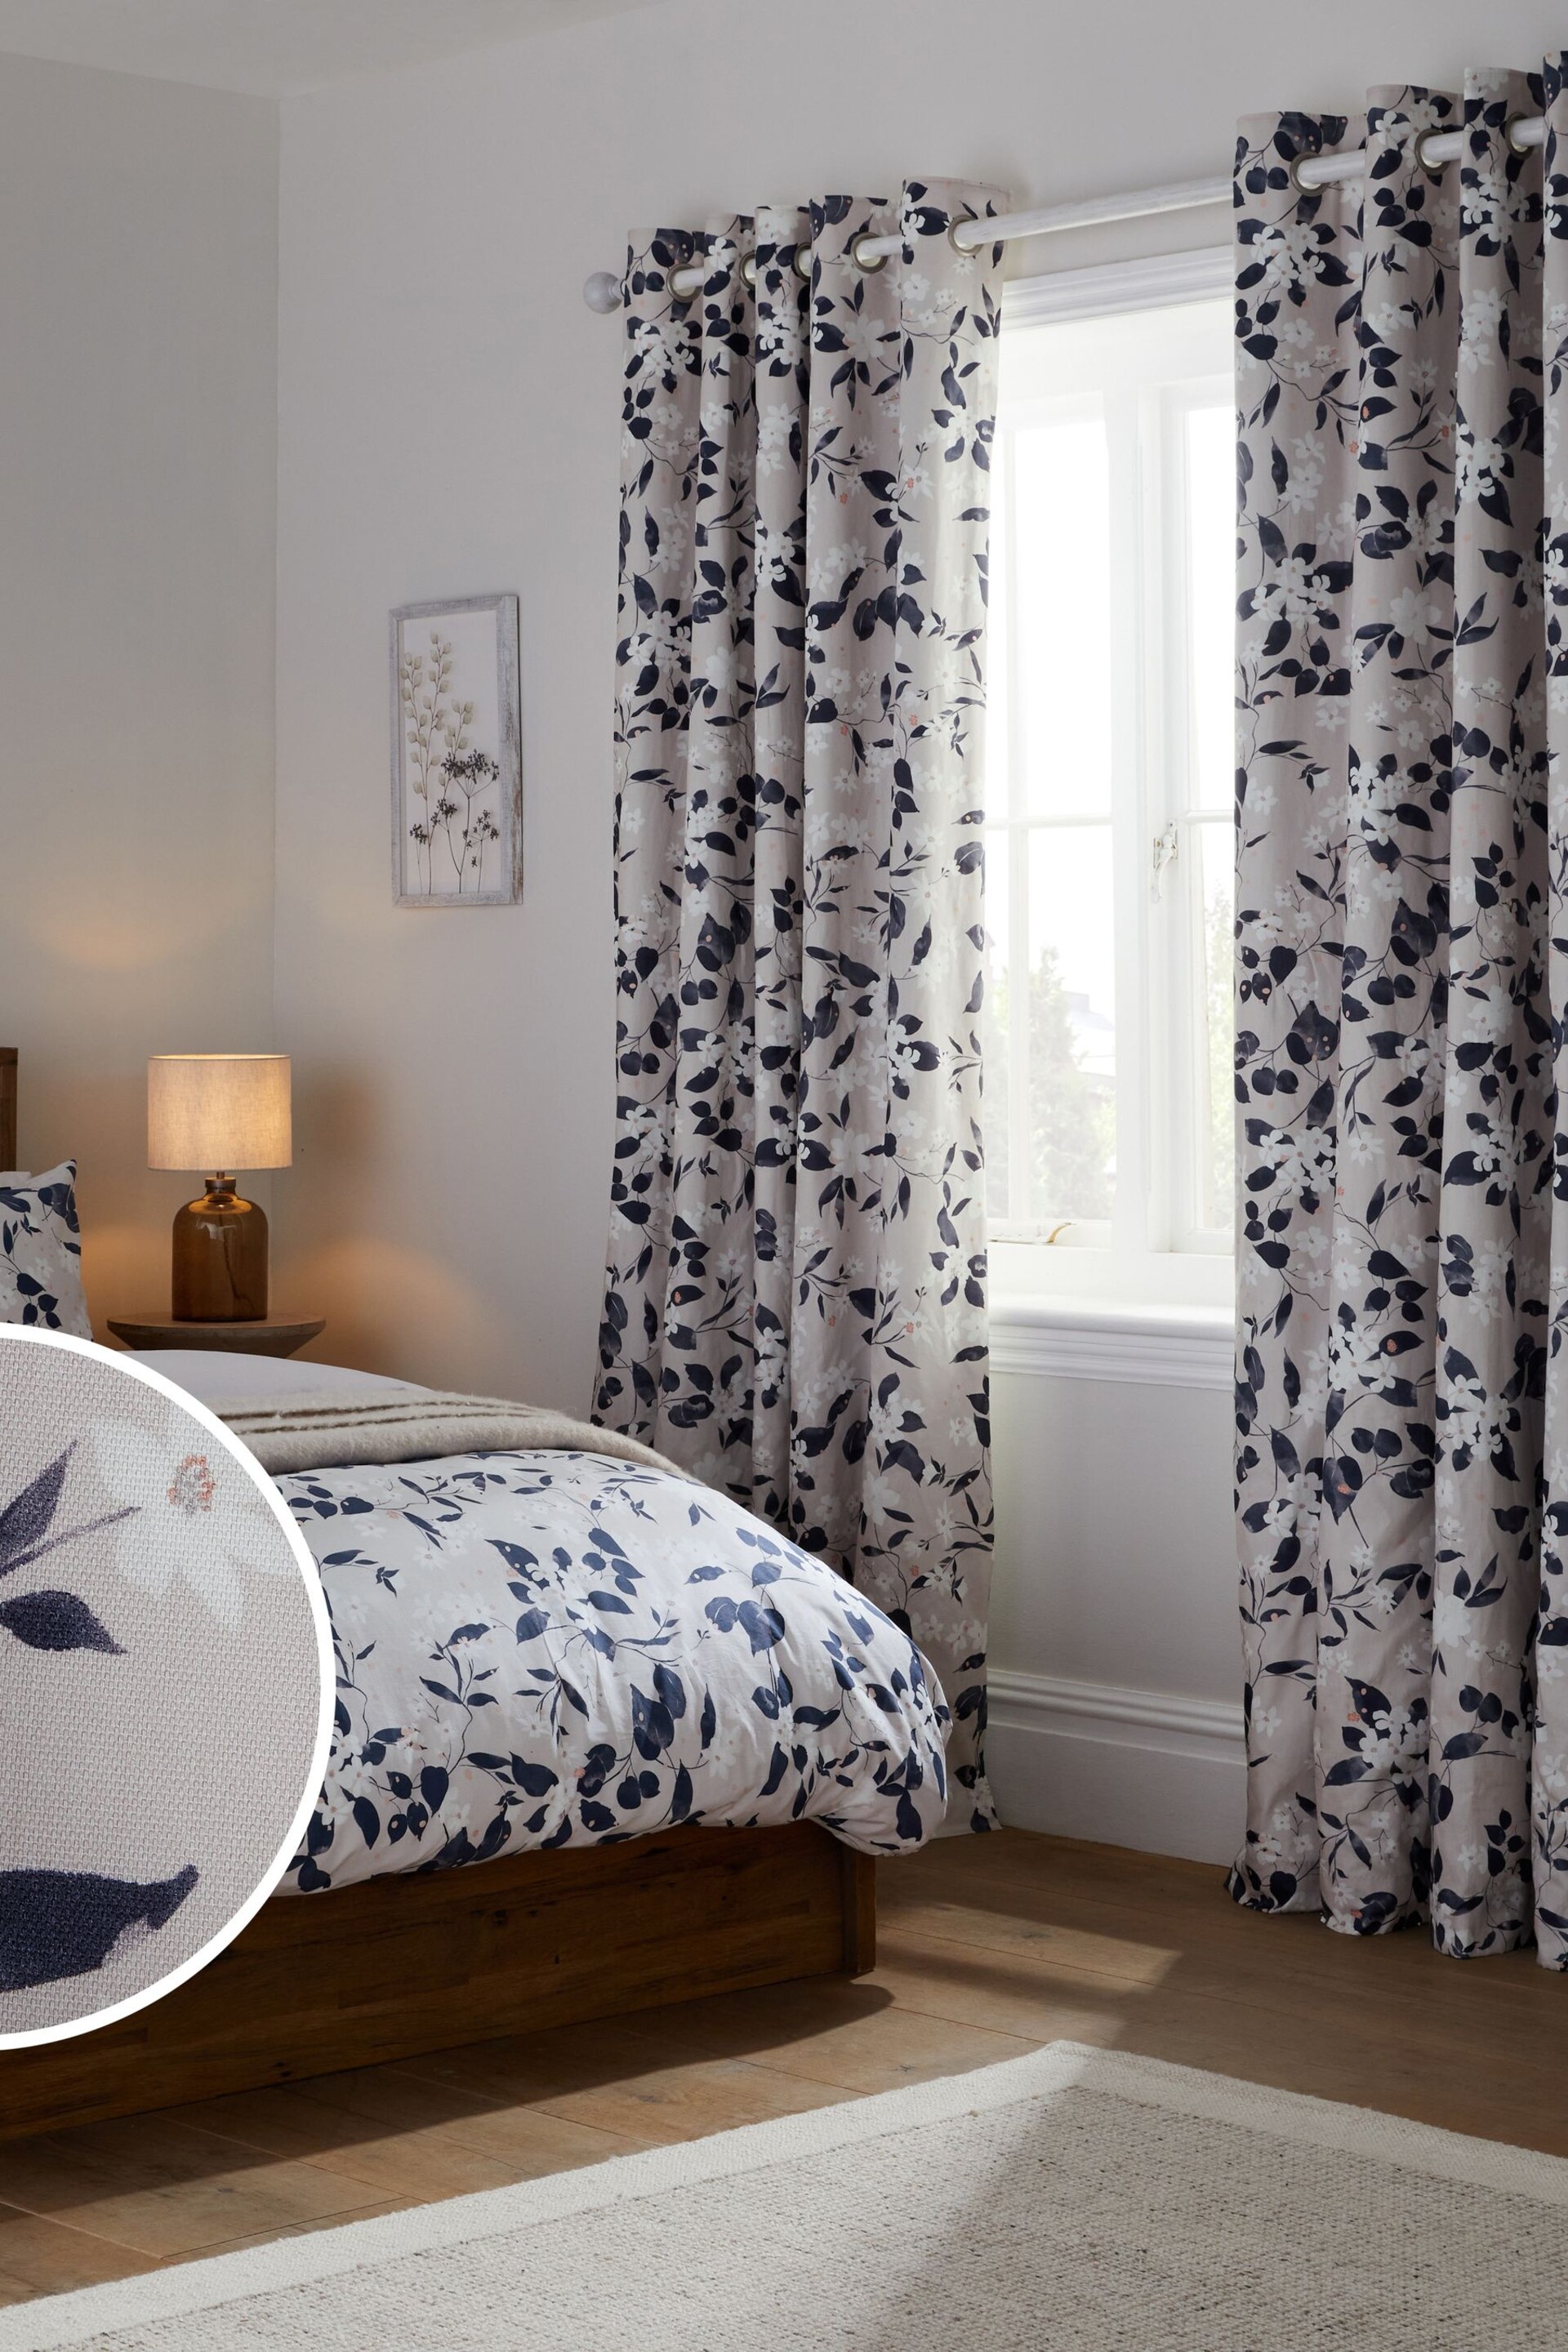 Blue/Neutral Blossom Floral Eyelet Blackout/Thermal Curtains - Image 1 of 8